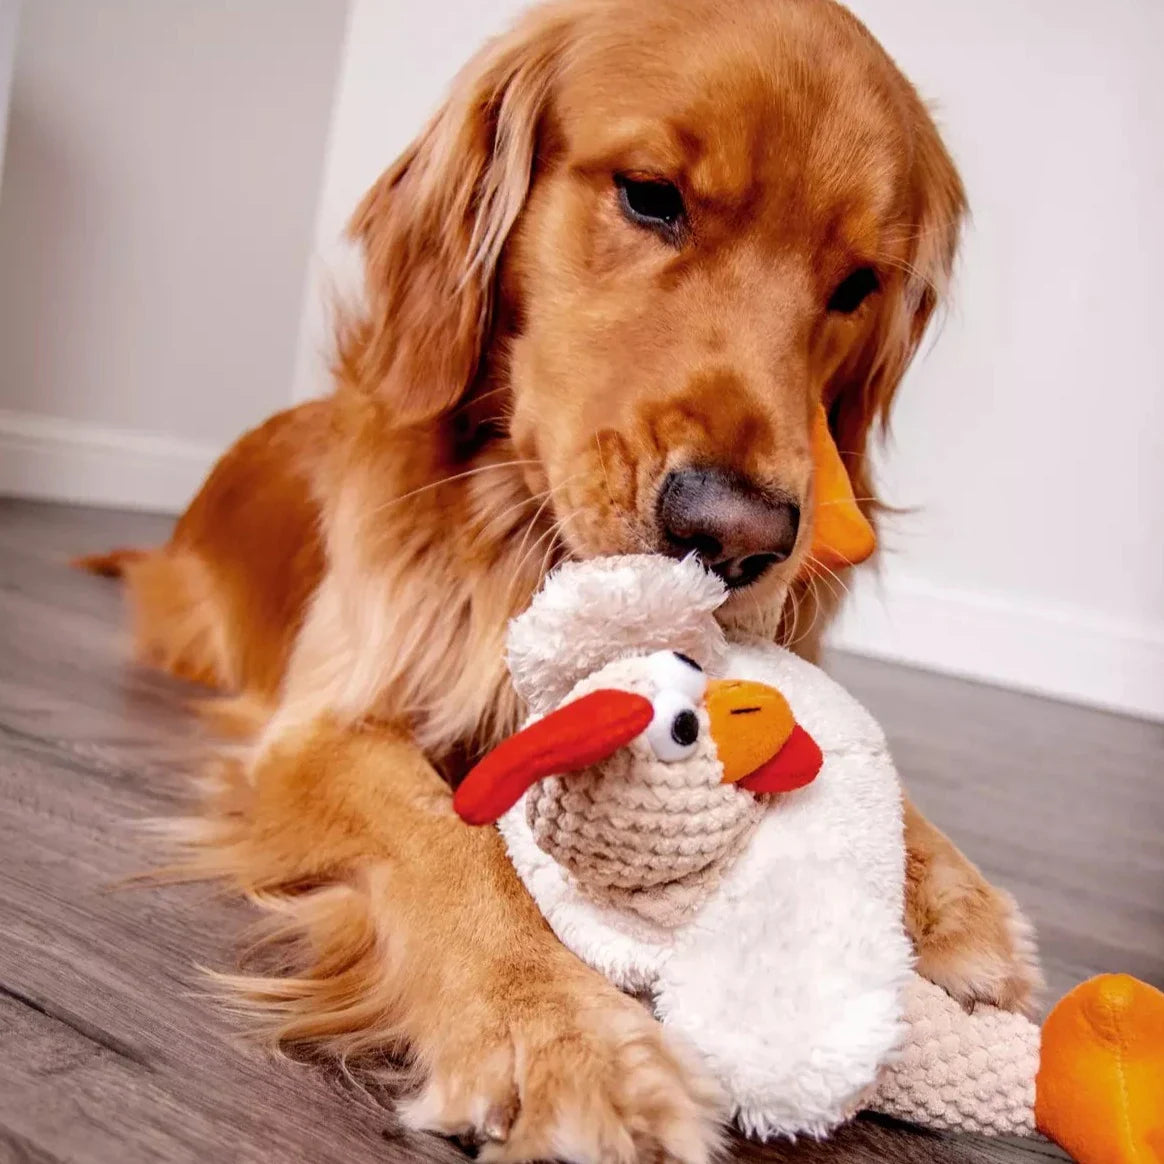 Checkers Squeaky Plush Dog Toy: Built to Last with Chew Guard Technology